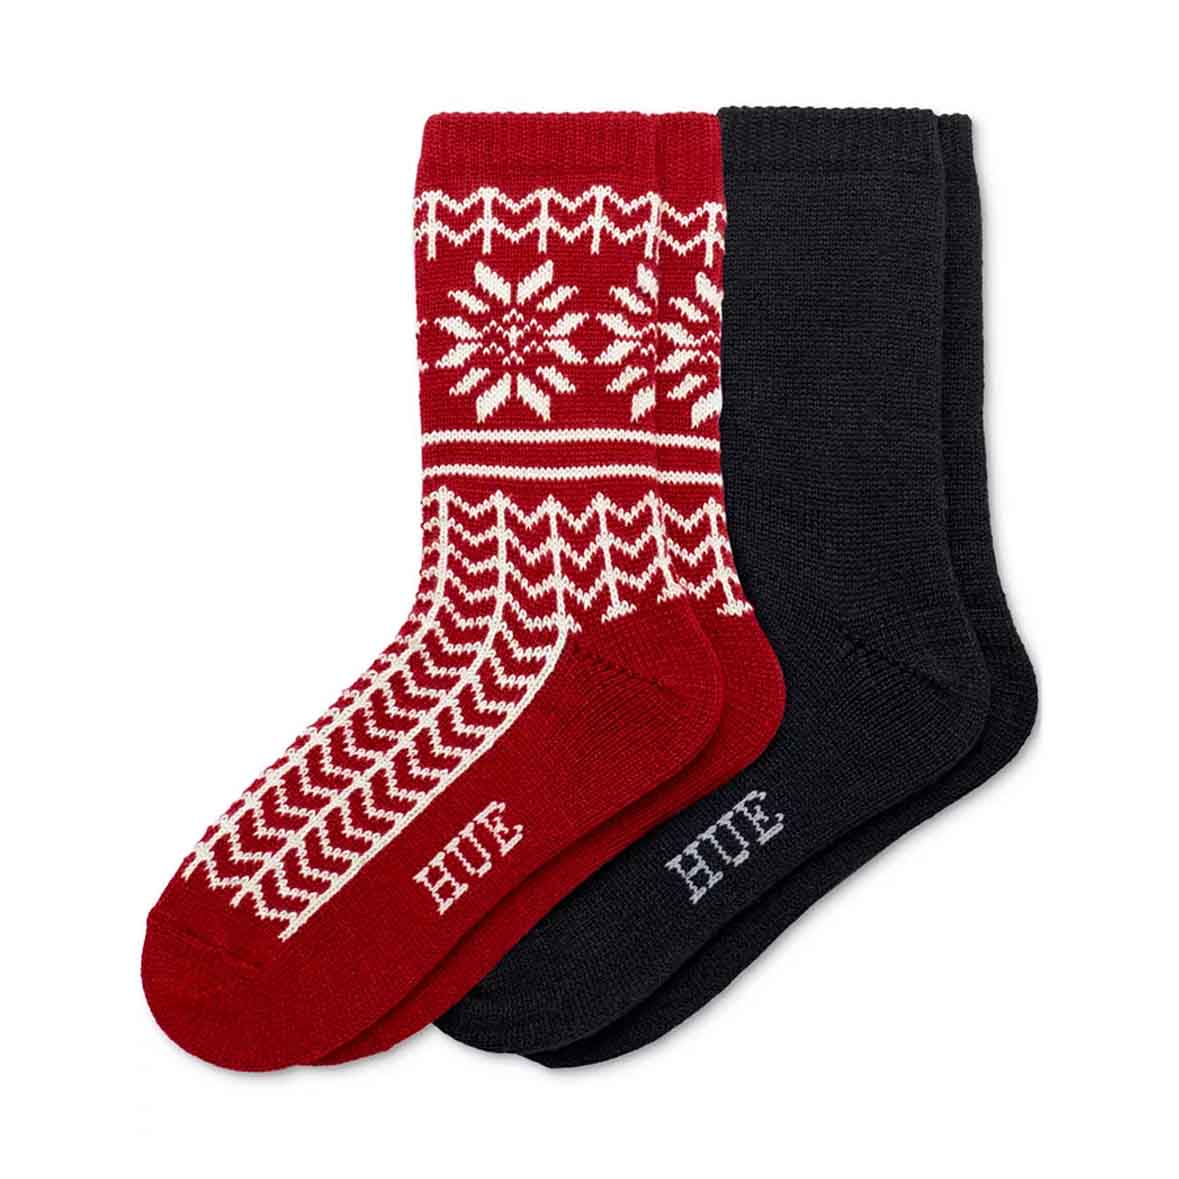 red and black pair of boot socks with white pattern